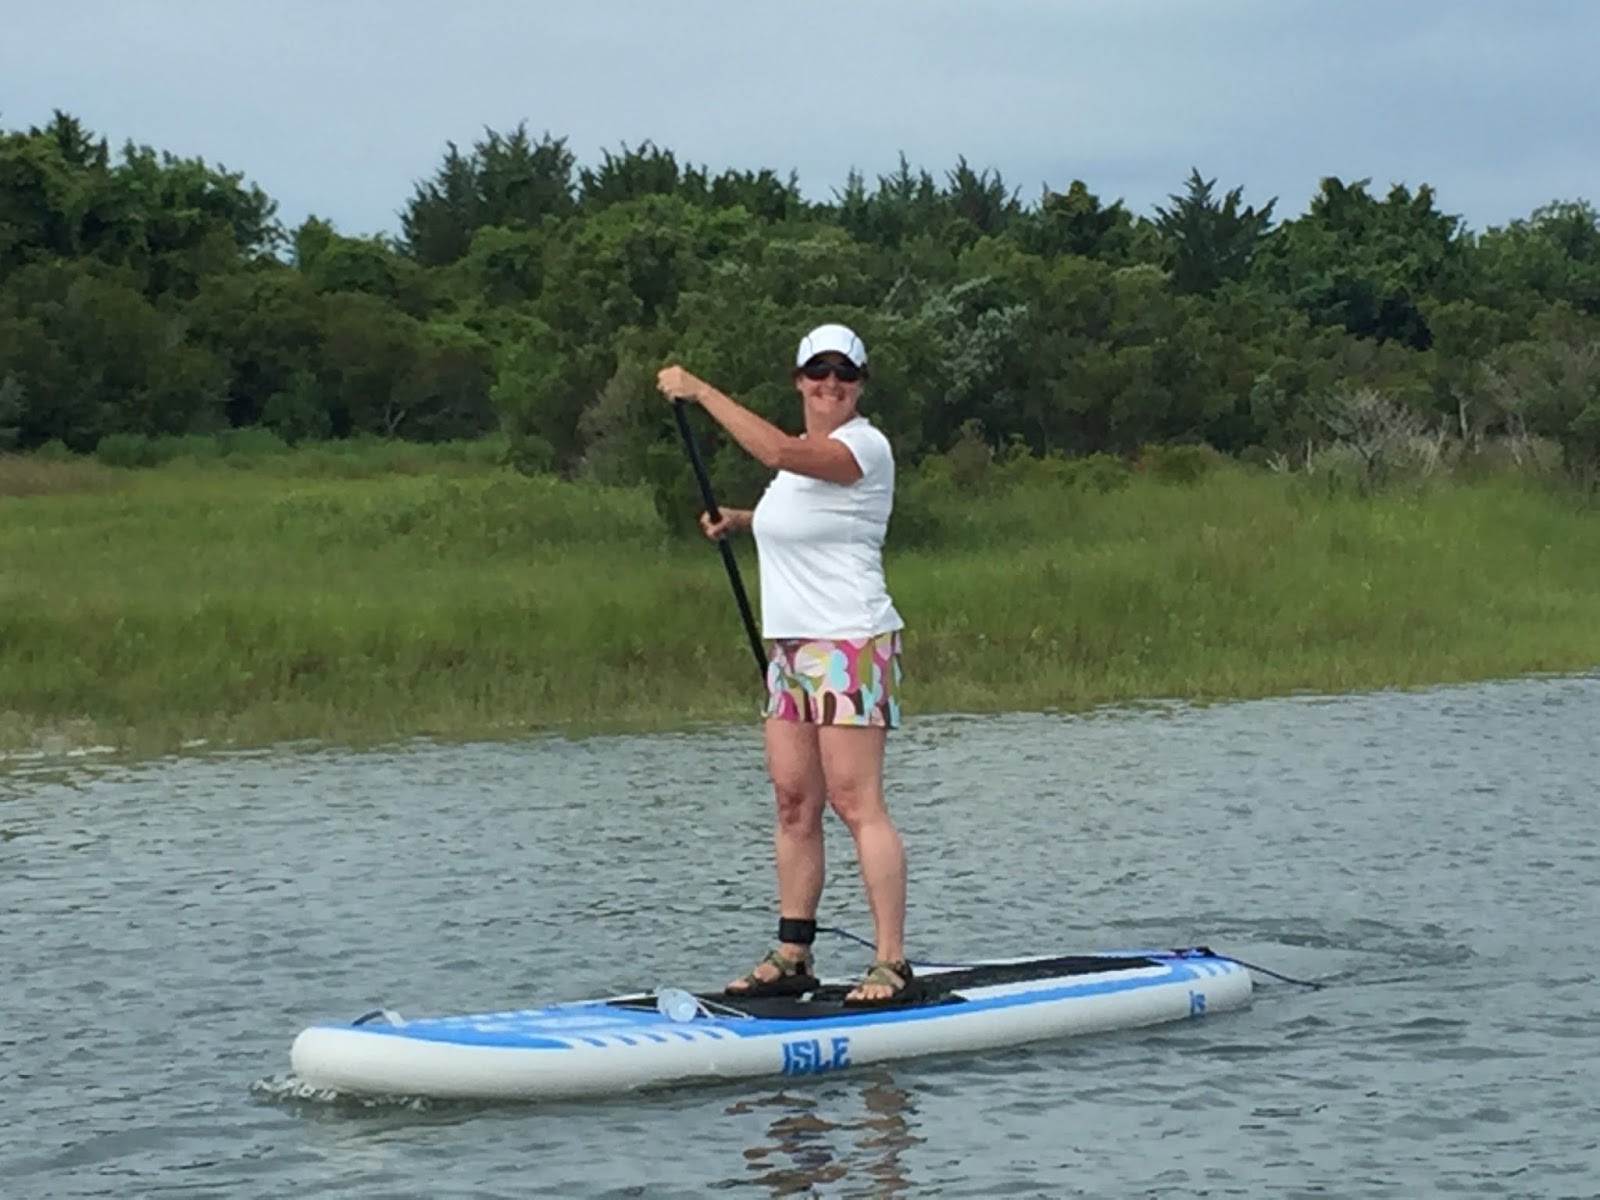 Kelly Melang, Author: WTF - Isle Surf and Sup Stand Up Paddle Board Review